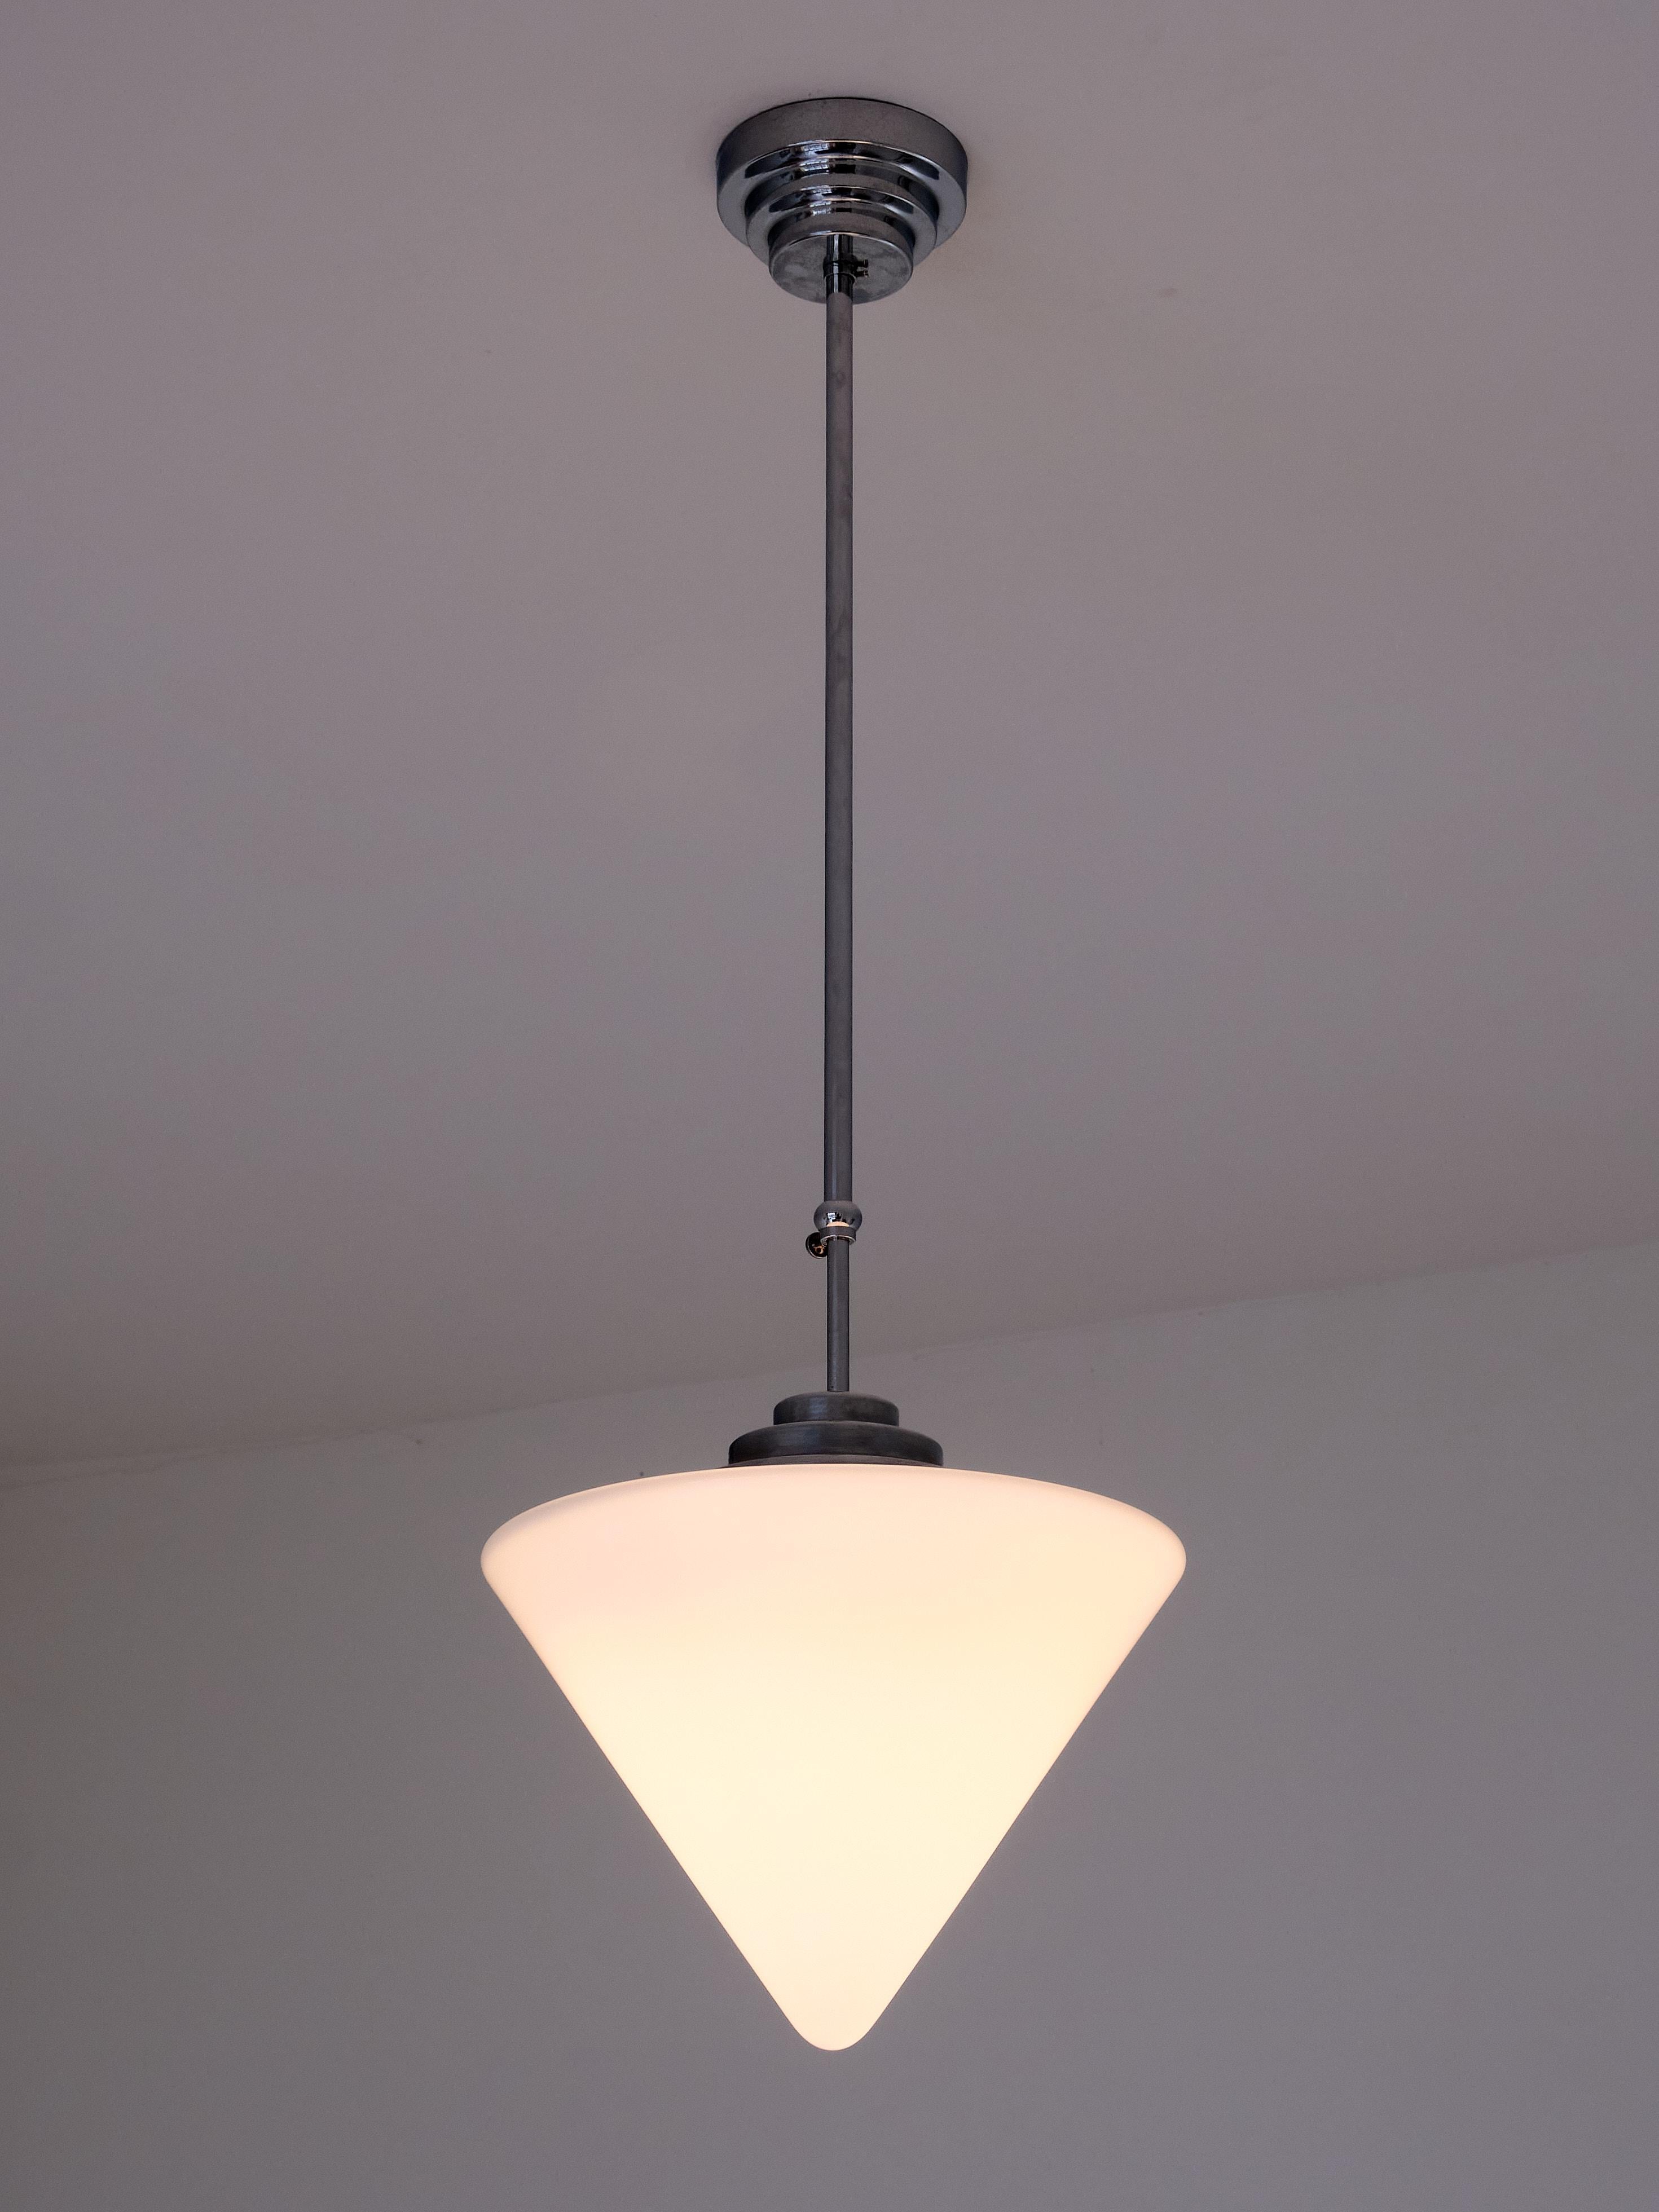 Dutch Gispen Cone Shaped Pendant Light with Adjustable Drop Height, Netherlands, 1950s For Sale